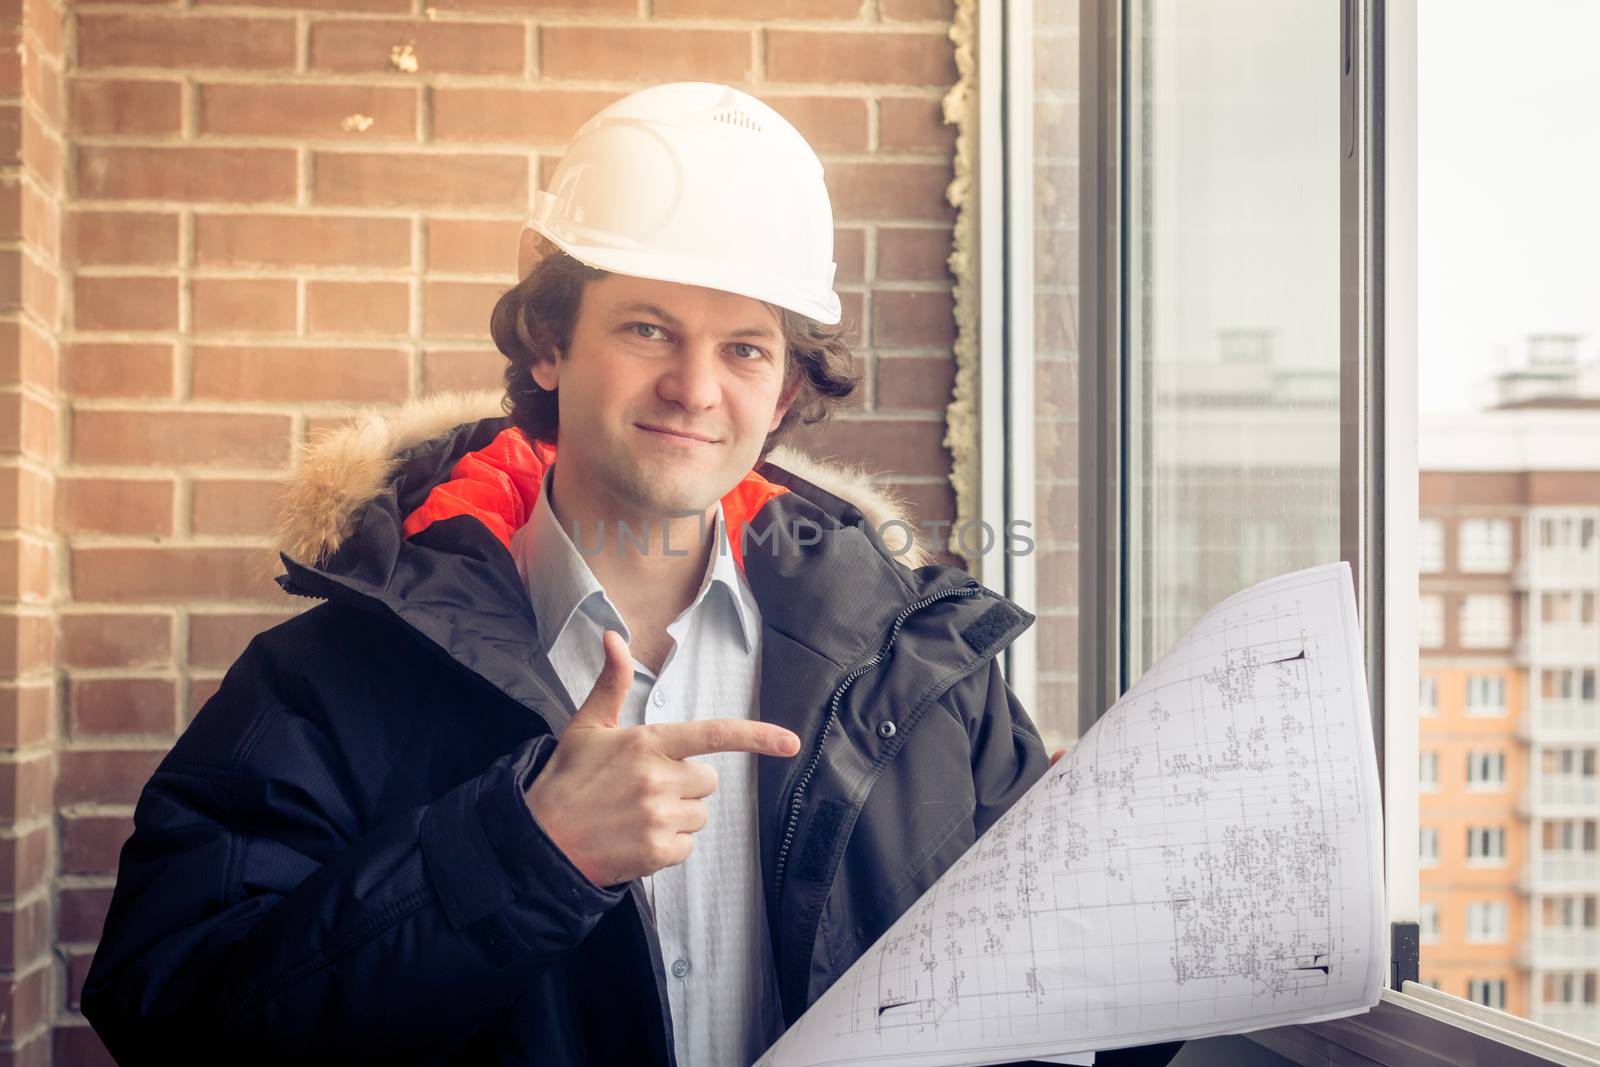 Architect in hardhat, holding blueprints smiling look at the camera and points his finger to the drawing. Soft focus, toned